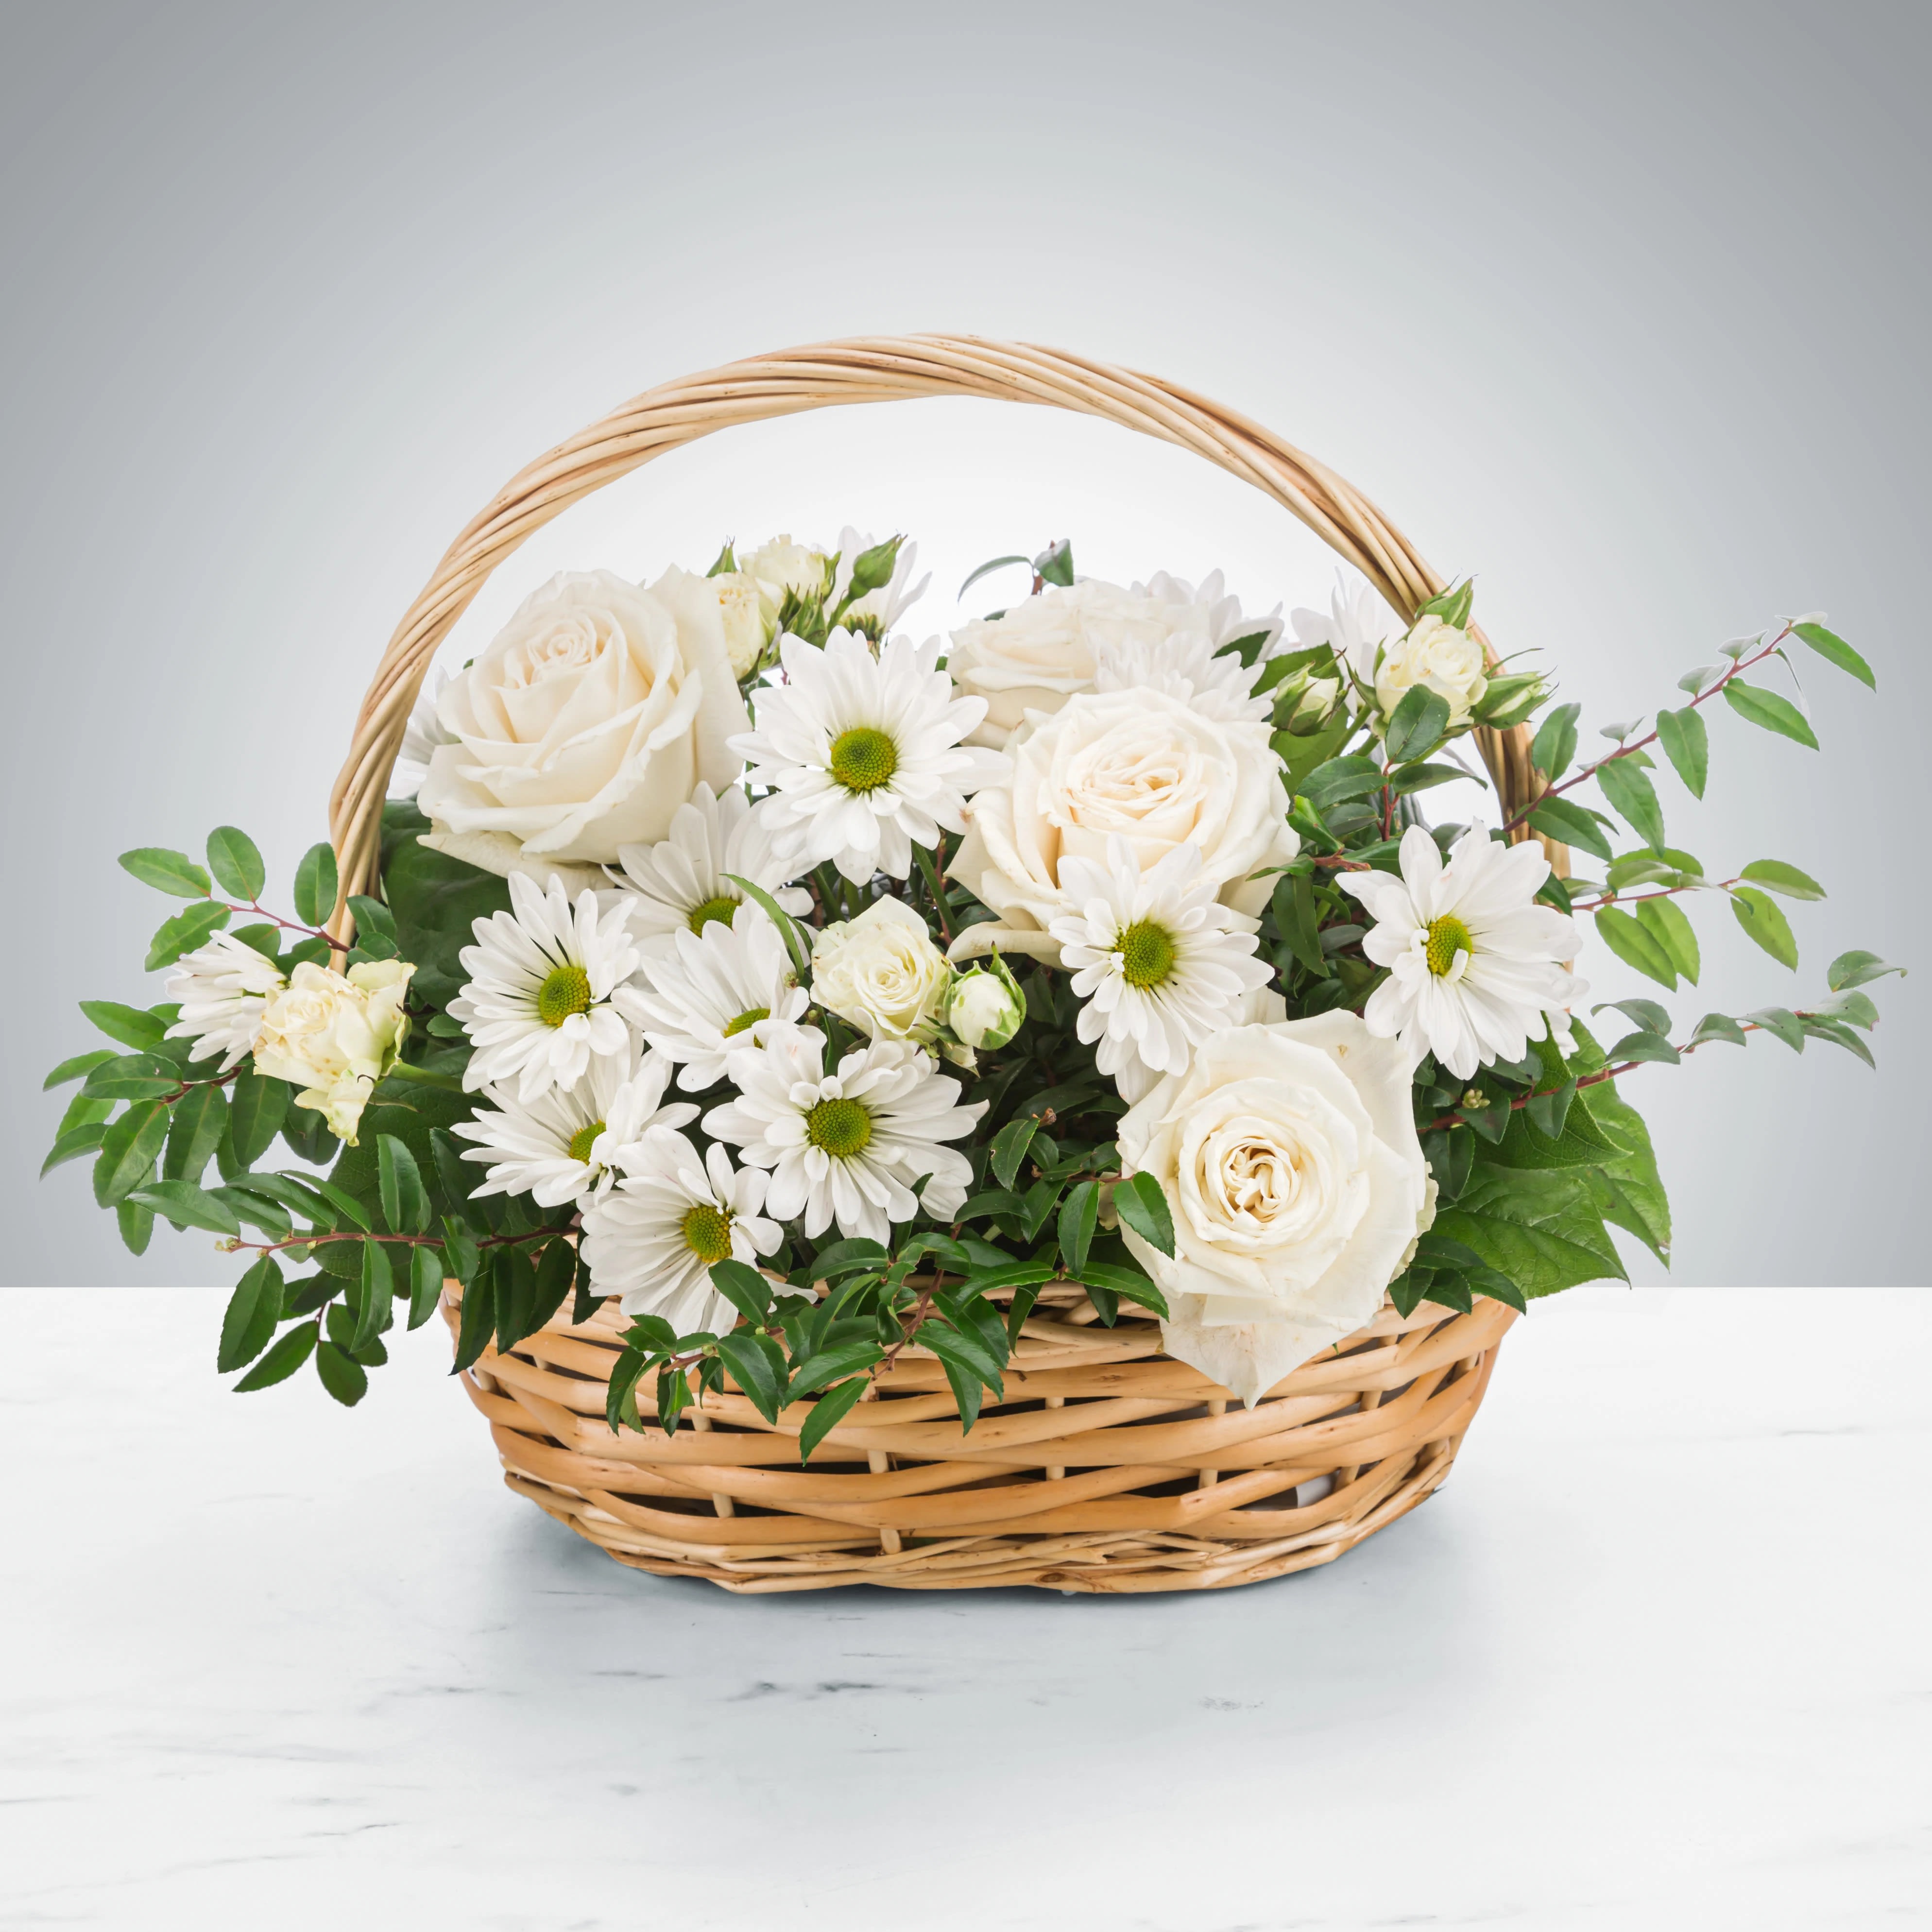 Pristine - A peaceful white and green basket featuring white daisy mums and white roses with greenery in a basket.  Approximate Dimensions: 14&quot;D x 10&quot;H